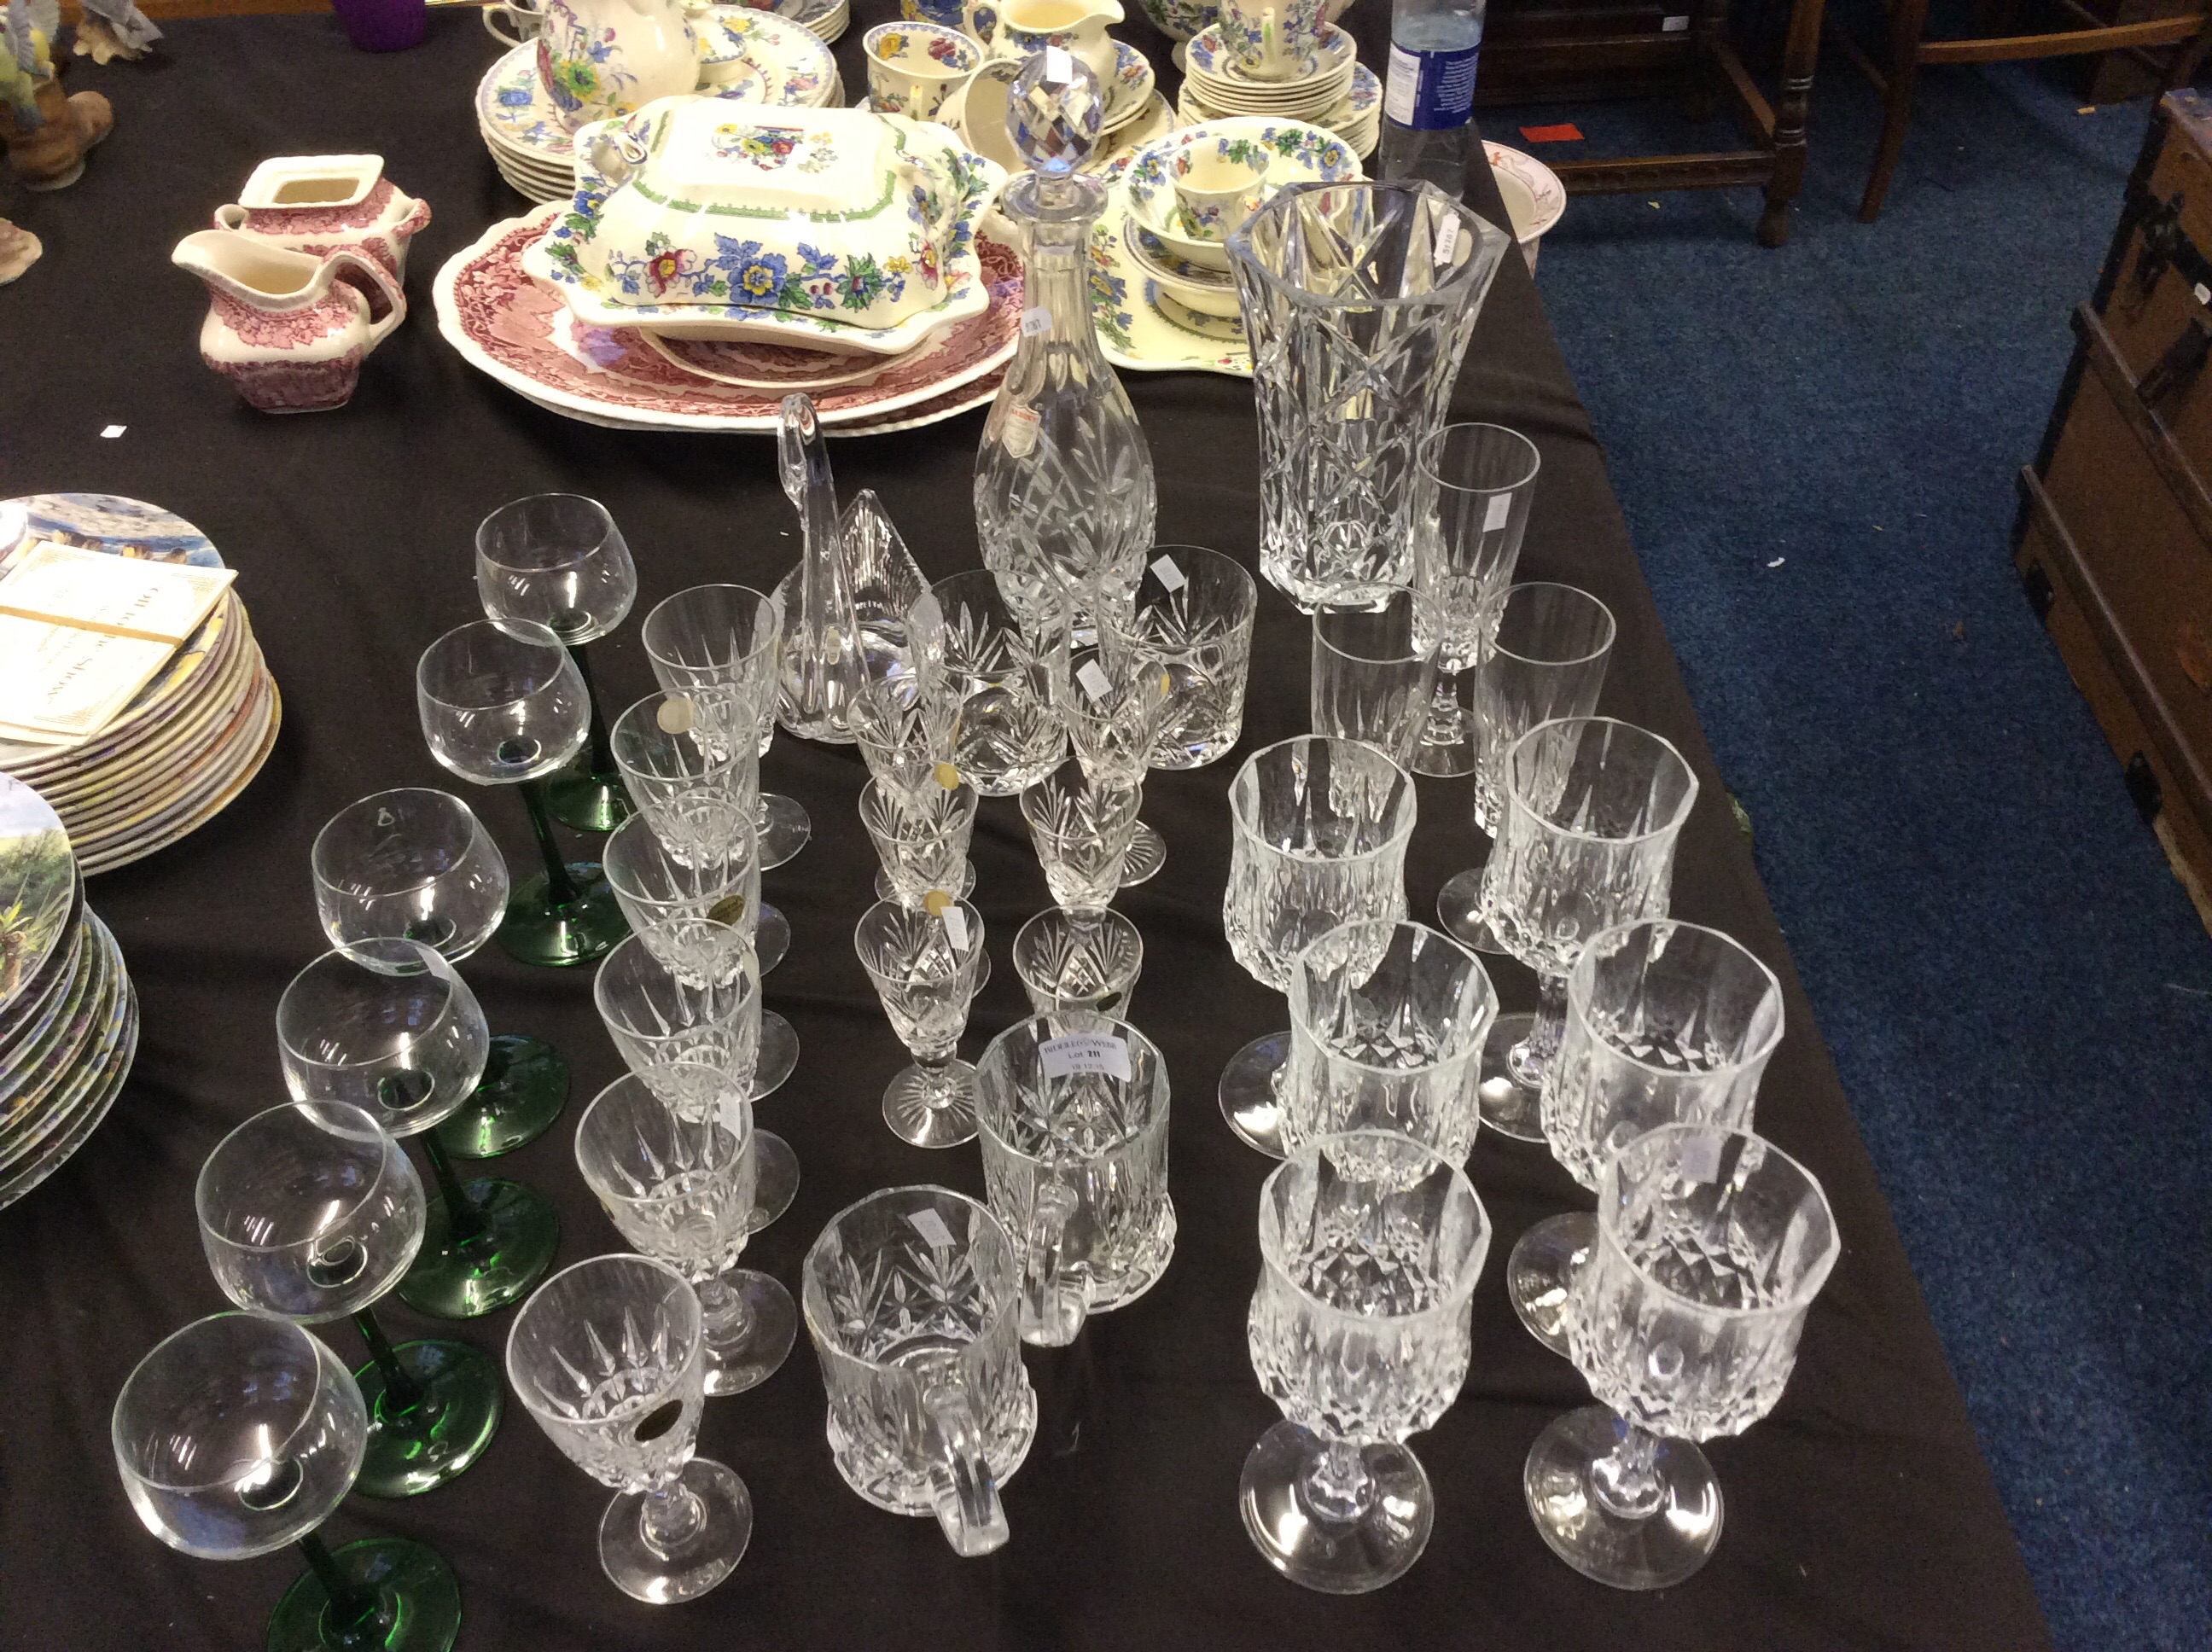 A collection of cut glass to include a decanter and a swan